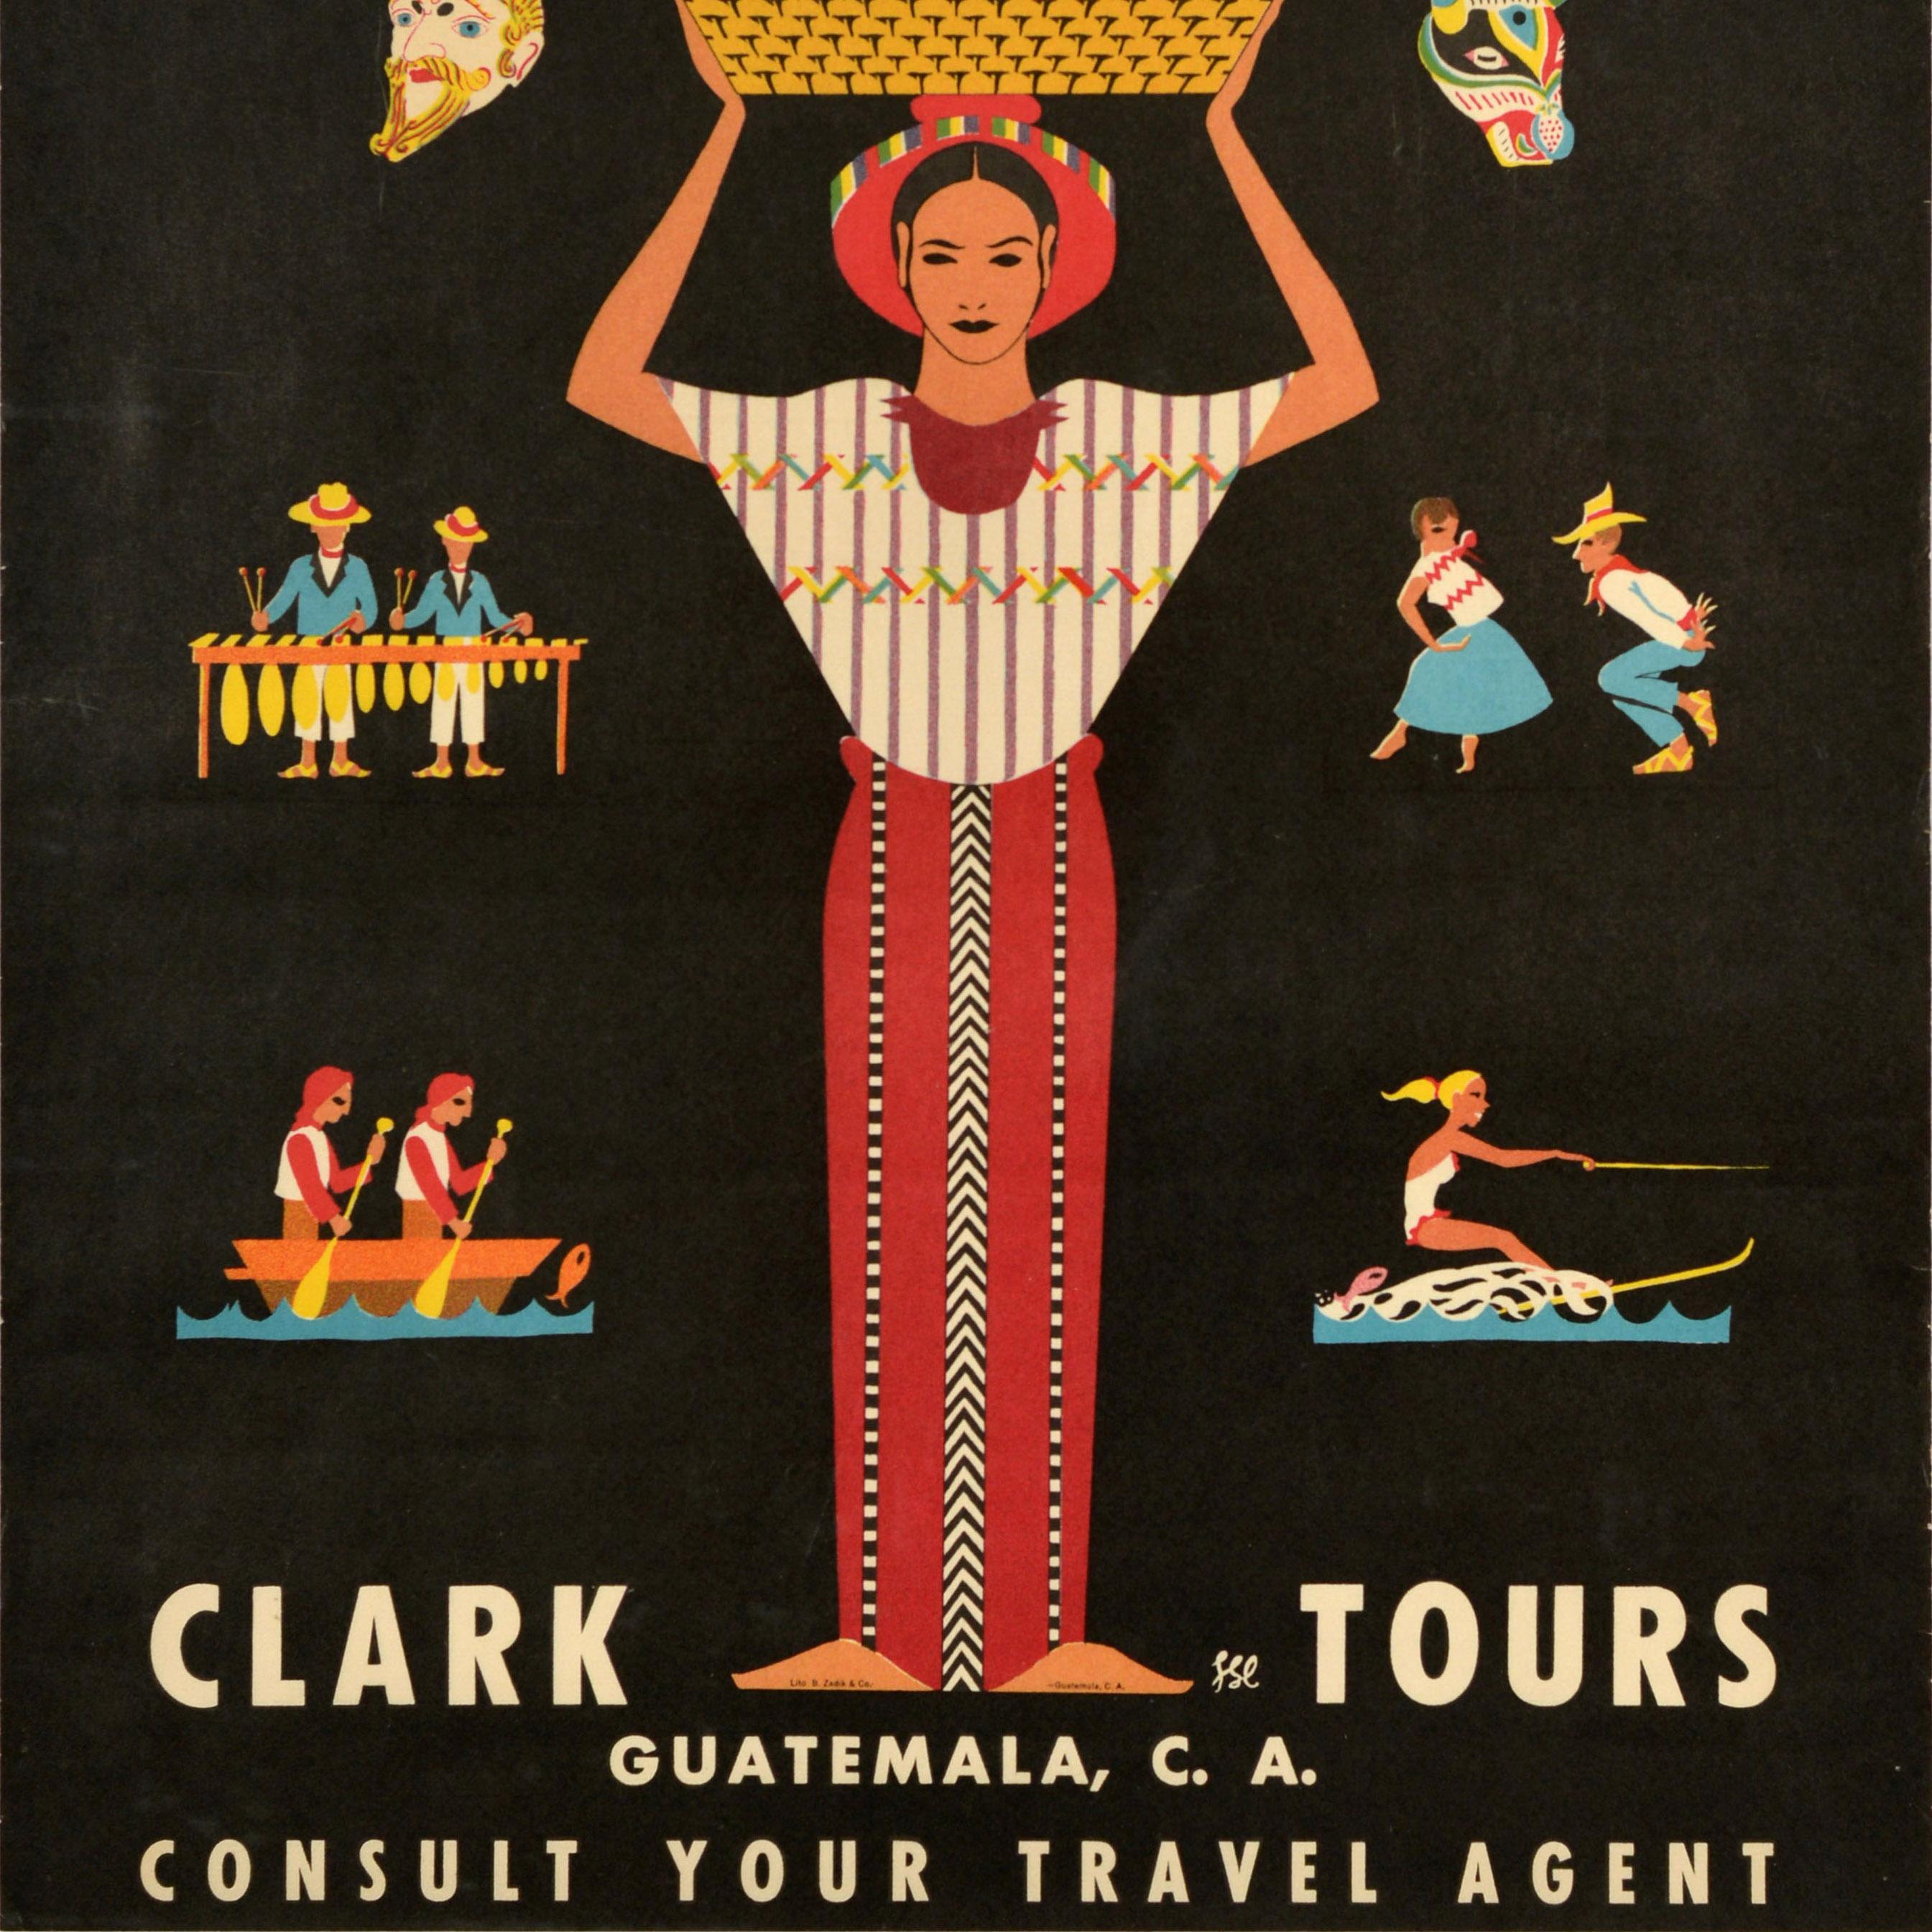 Origi1nal Vintage Travel Advertising Poster Guatemala Clark Tours Midcentury Art In Good Condition For Sale In London, GB